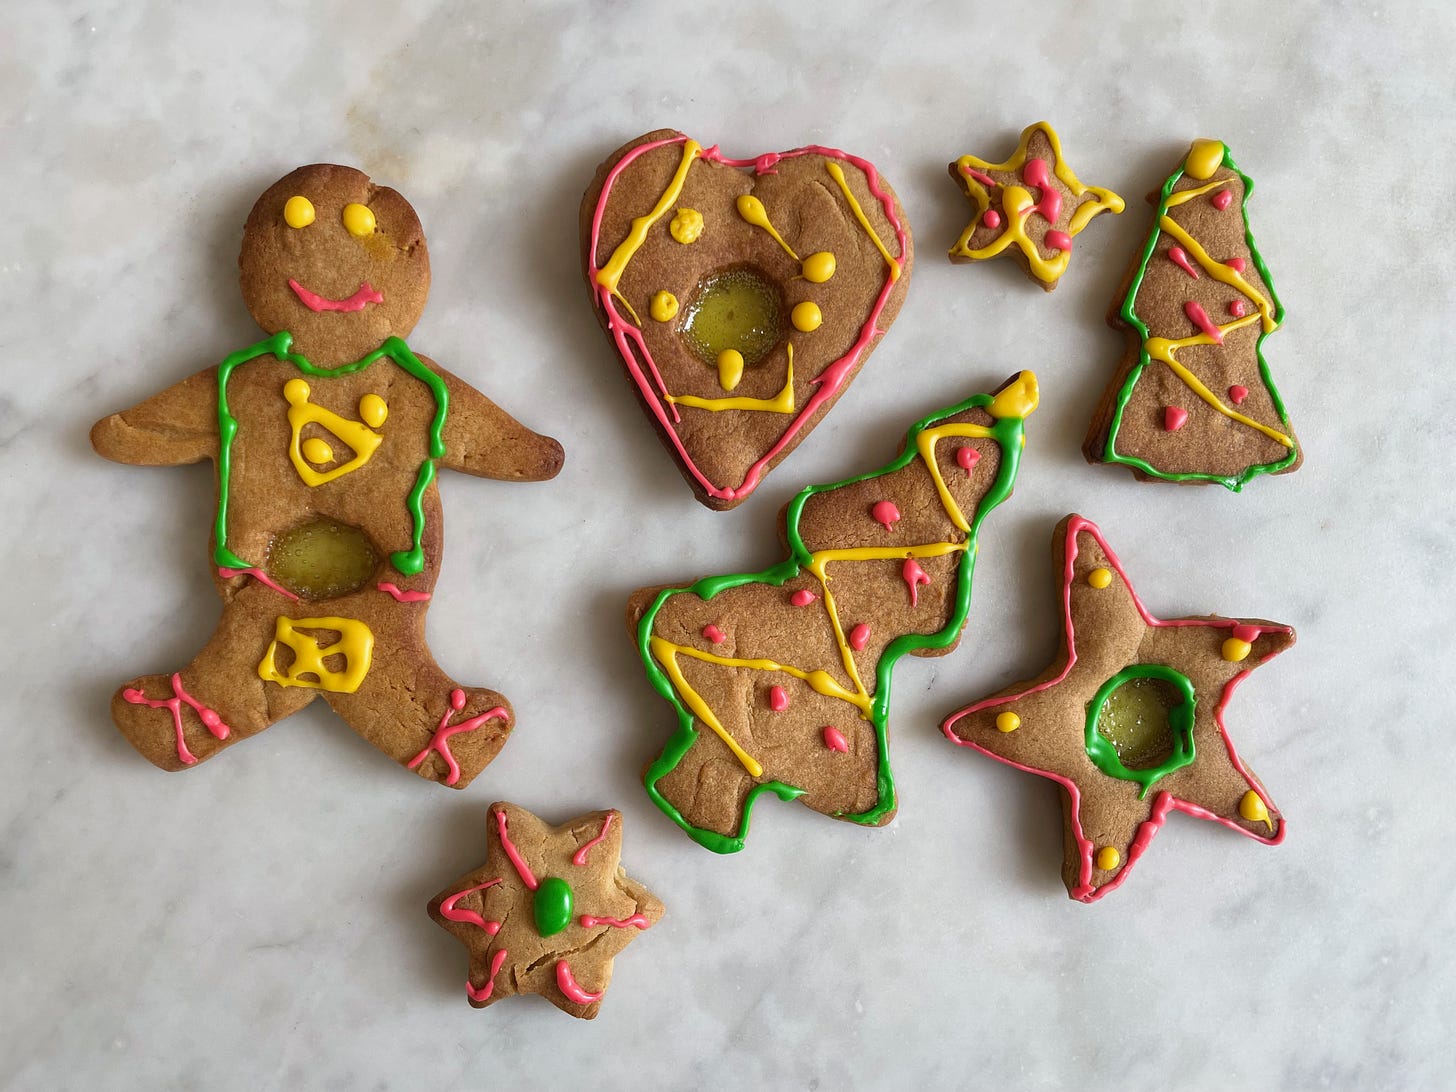 Gingerbread biscuits with decorative coloured icing, gingerbread man, christmas tree, love heart and star